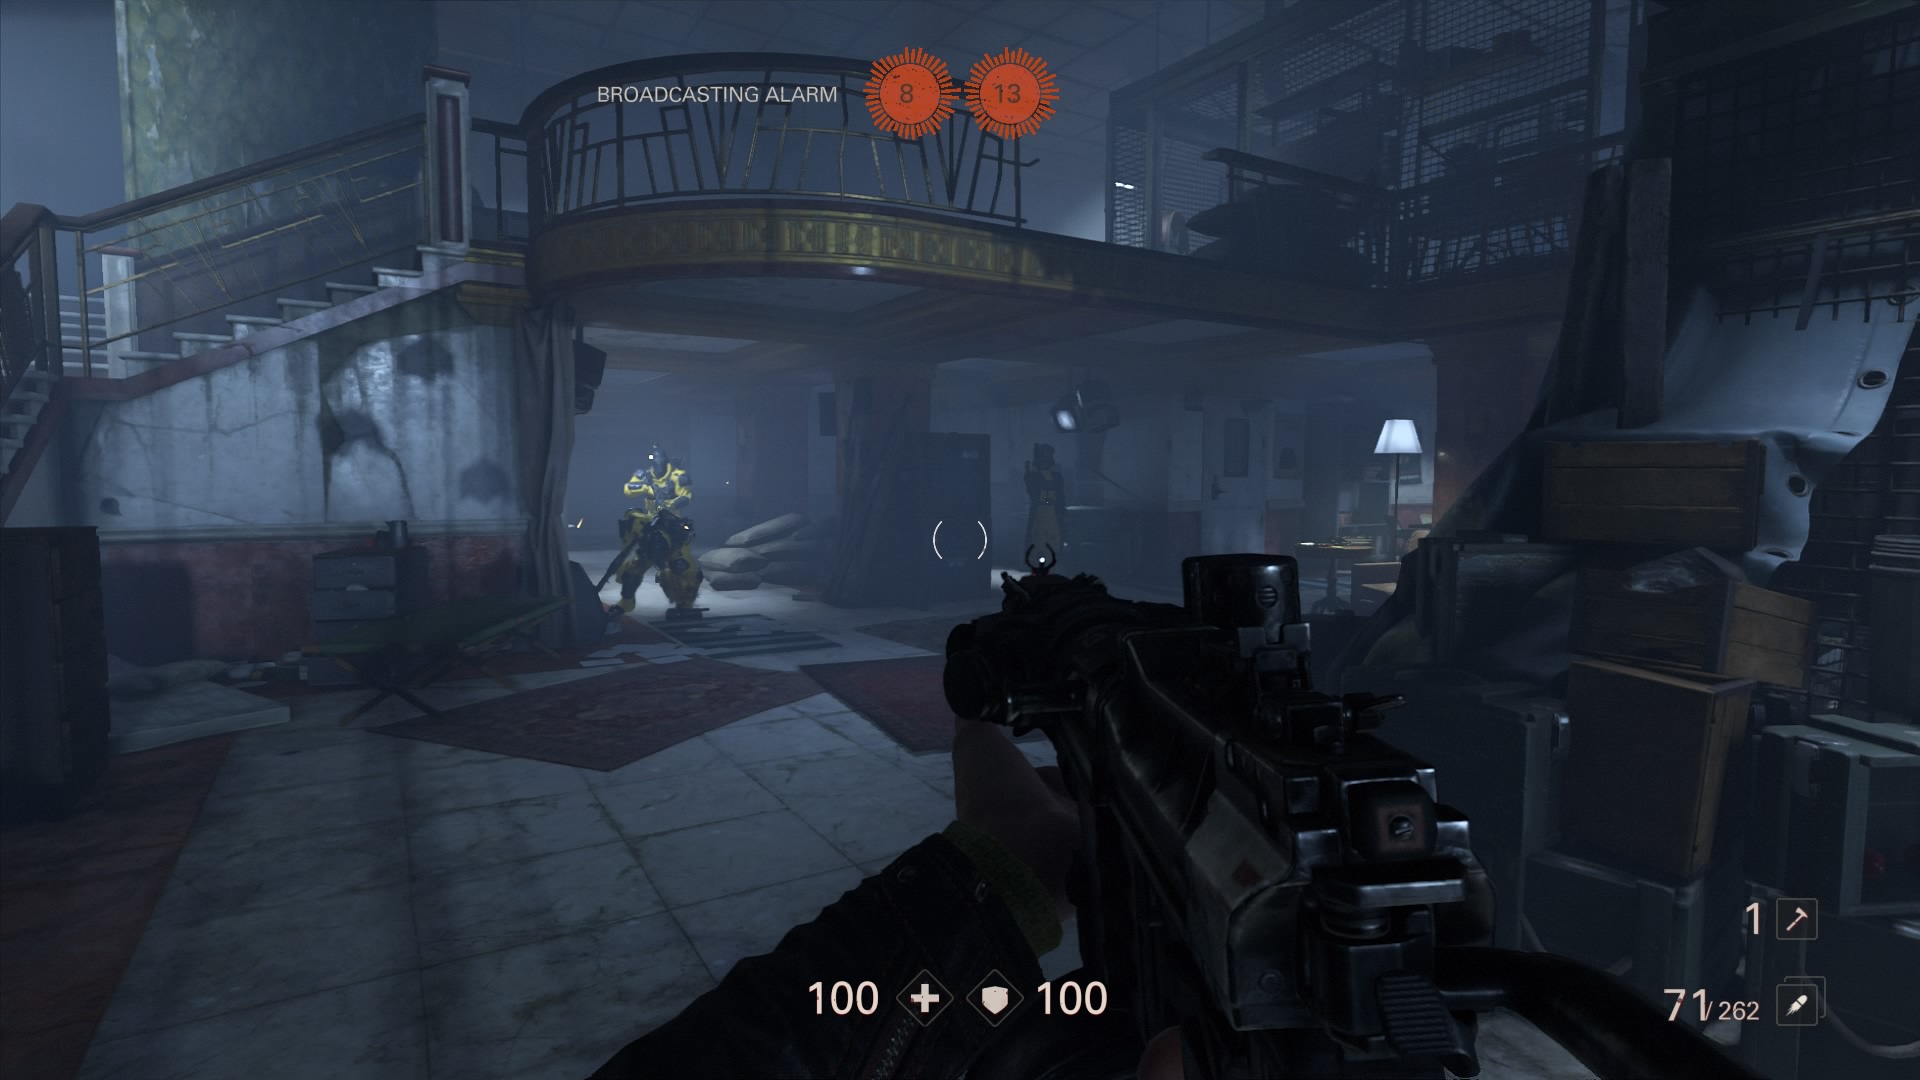 How To Unlock More Game Modes In Wolfenstein: The New Order - Game